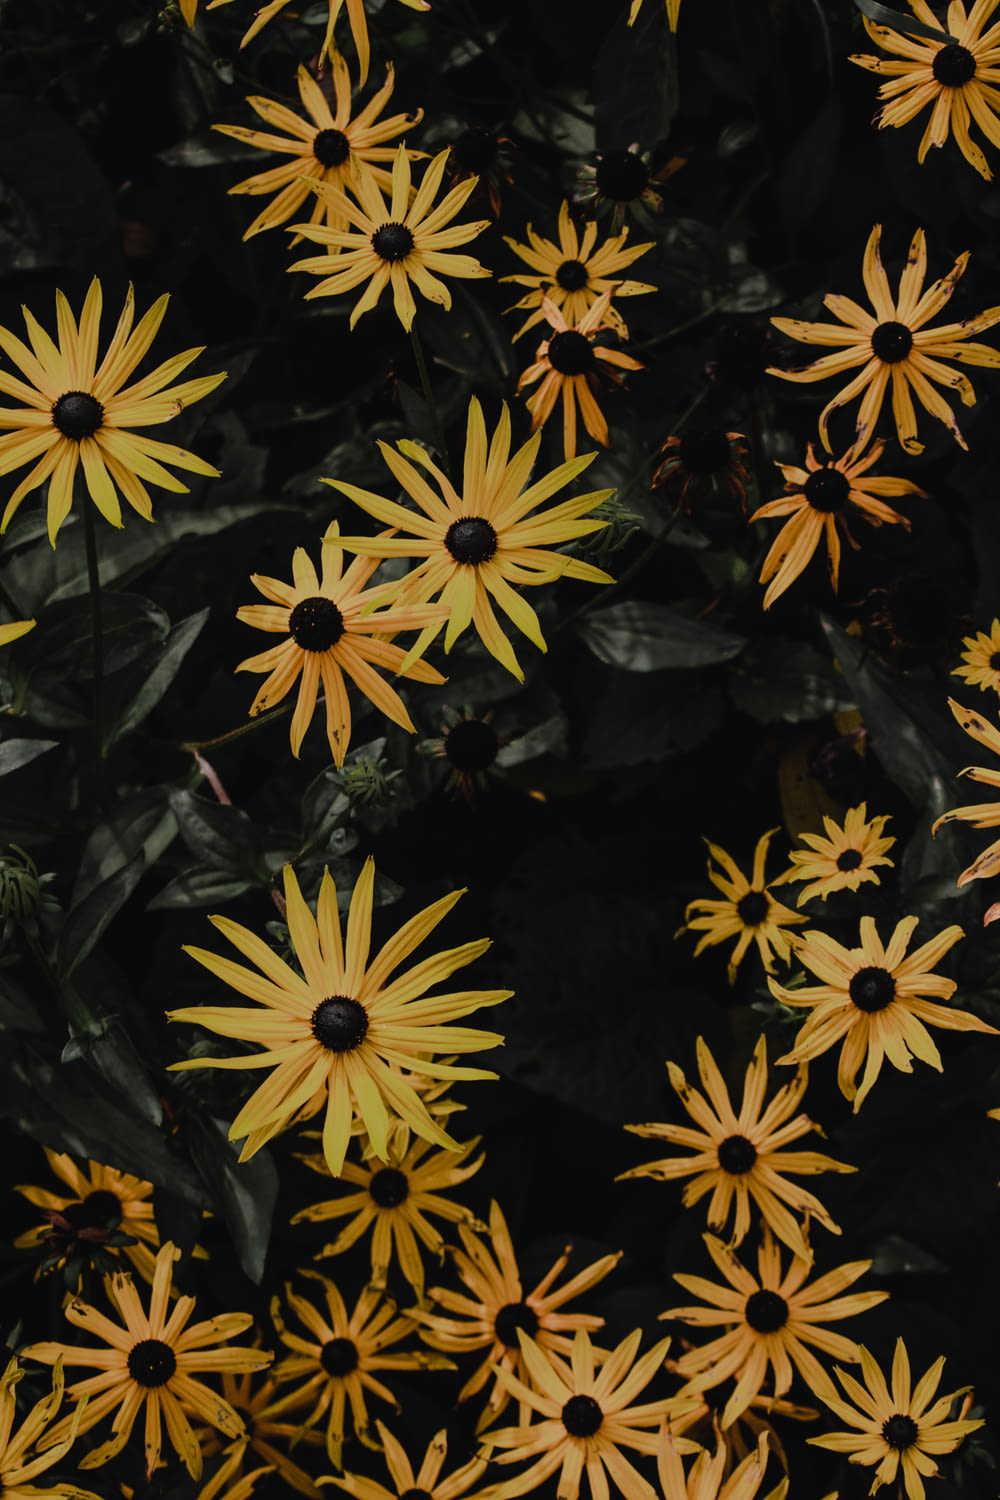 yellow and black flowers in close up photography